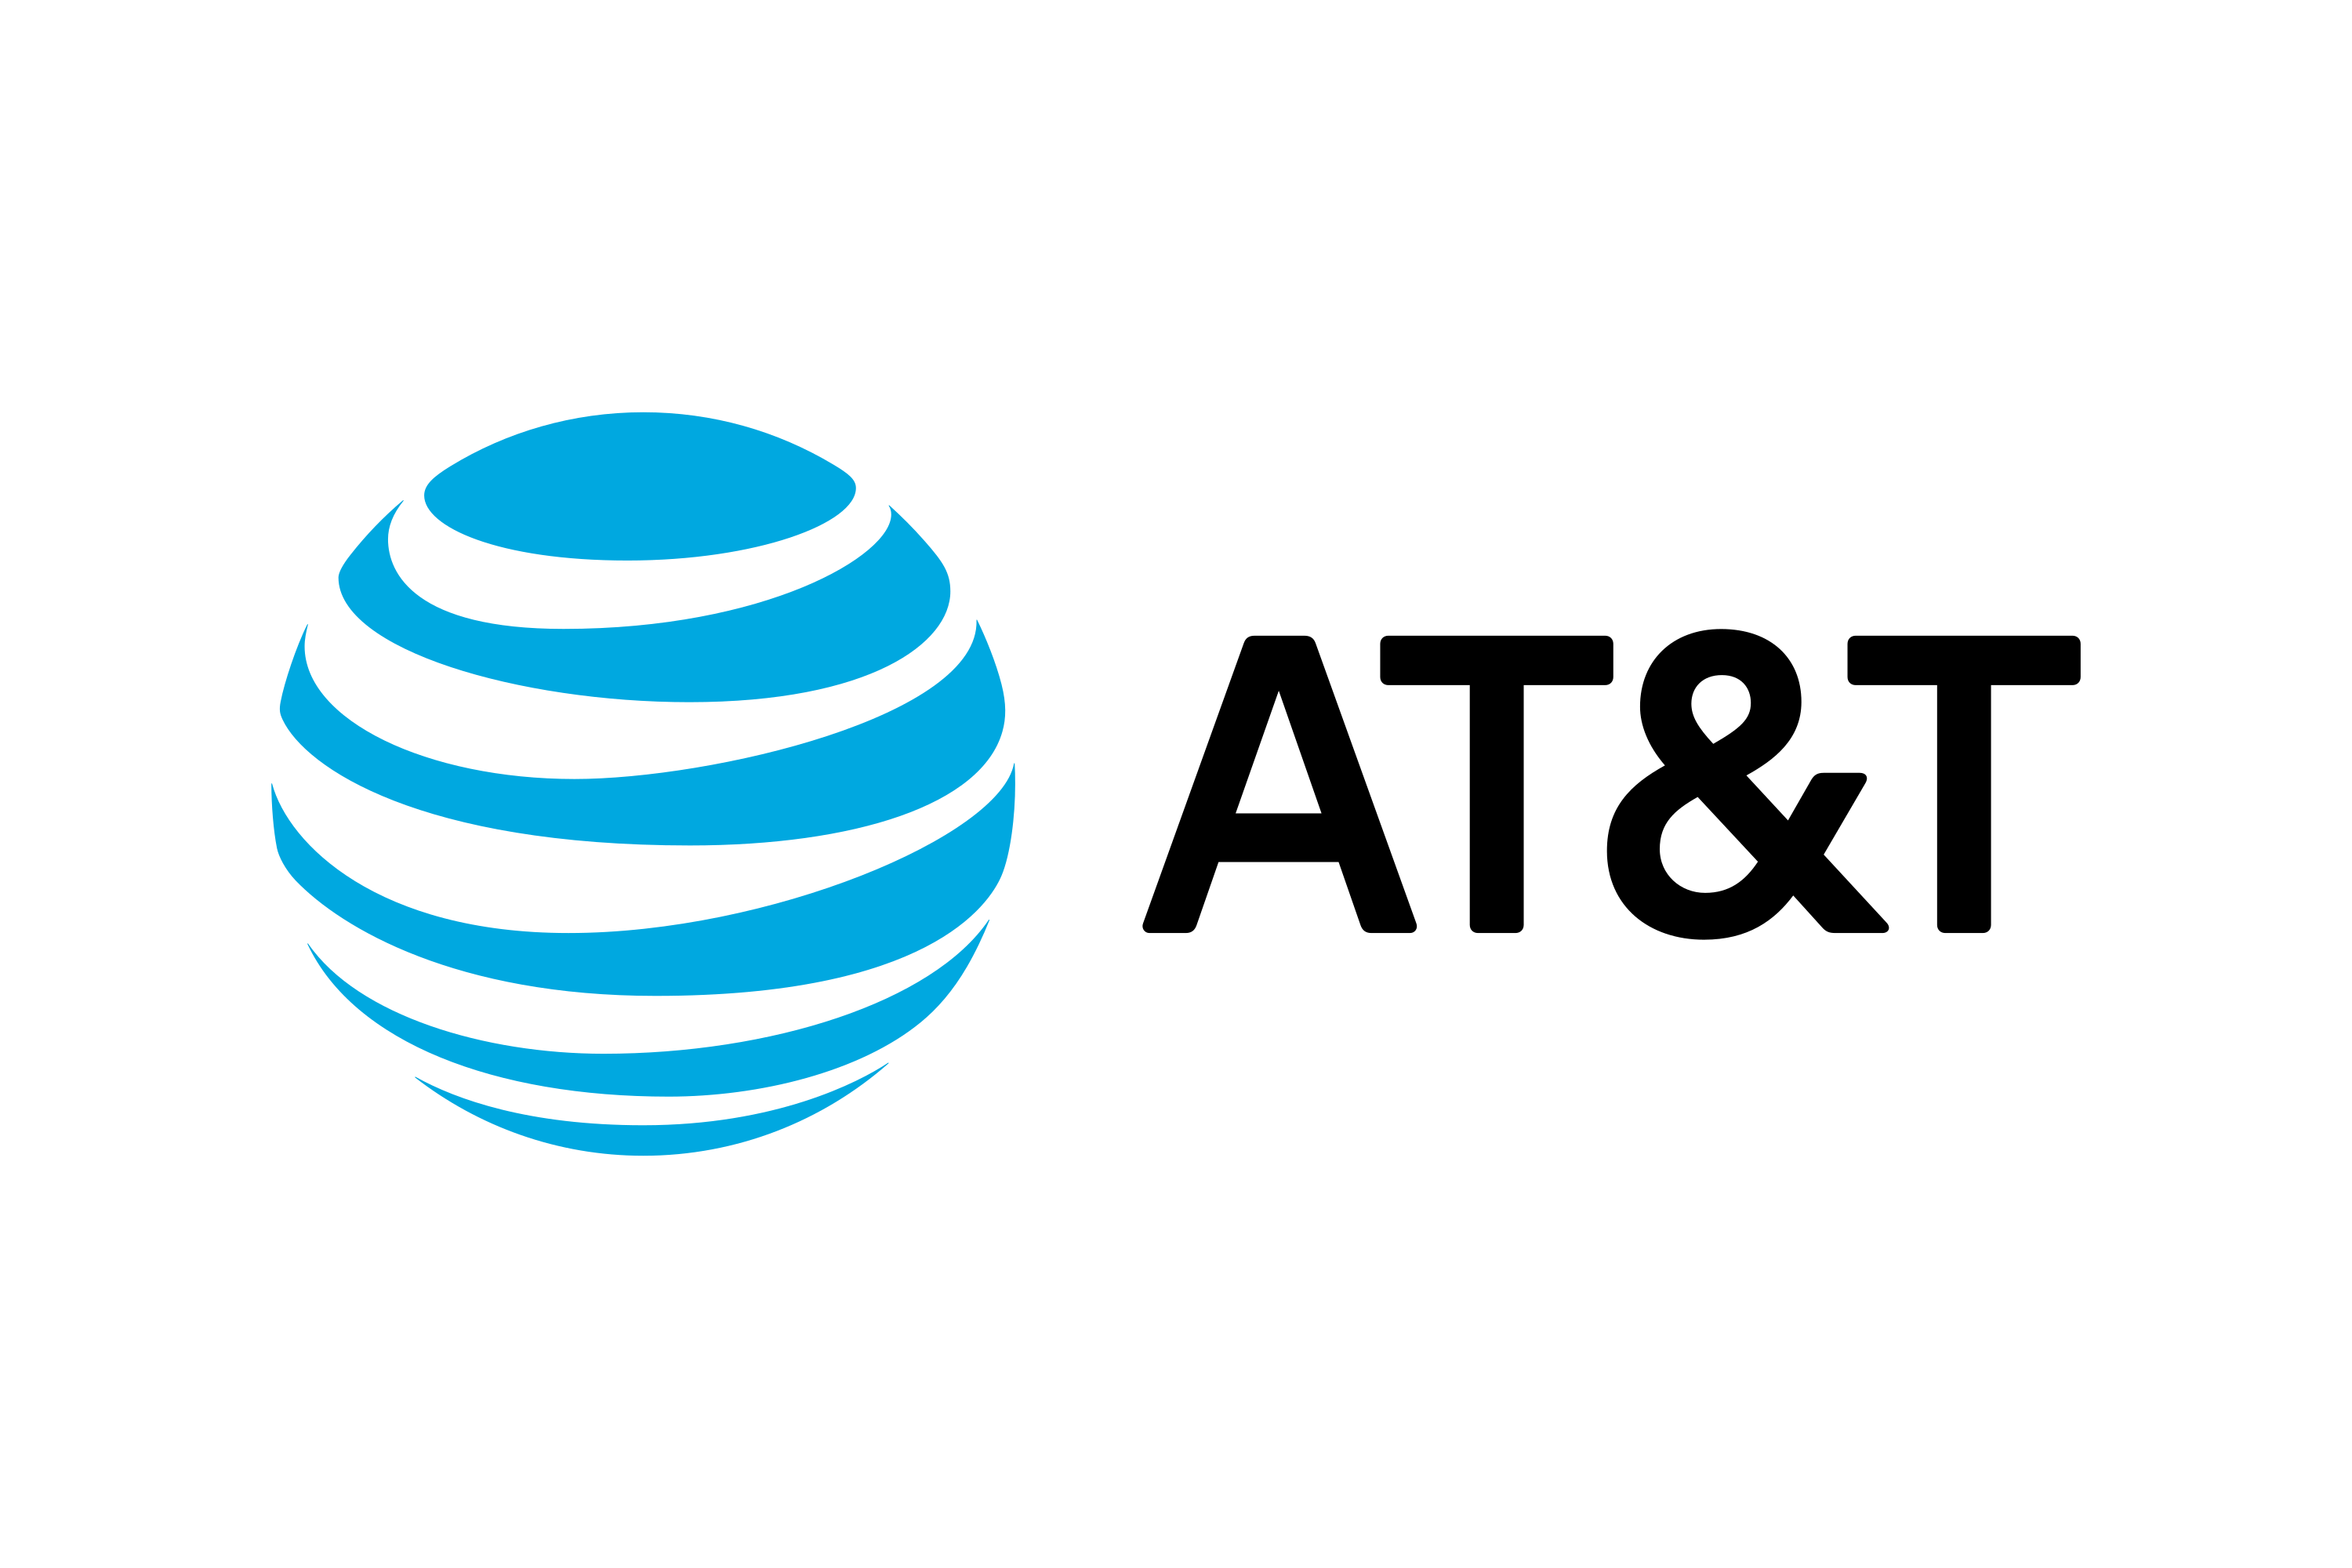 Download AT&T Corporation (American Telephone and Telegraph Company